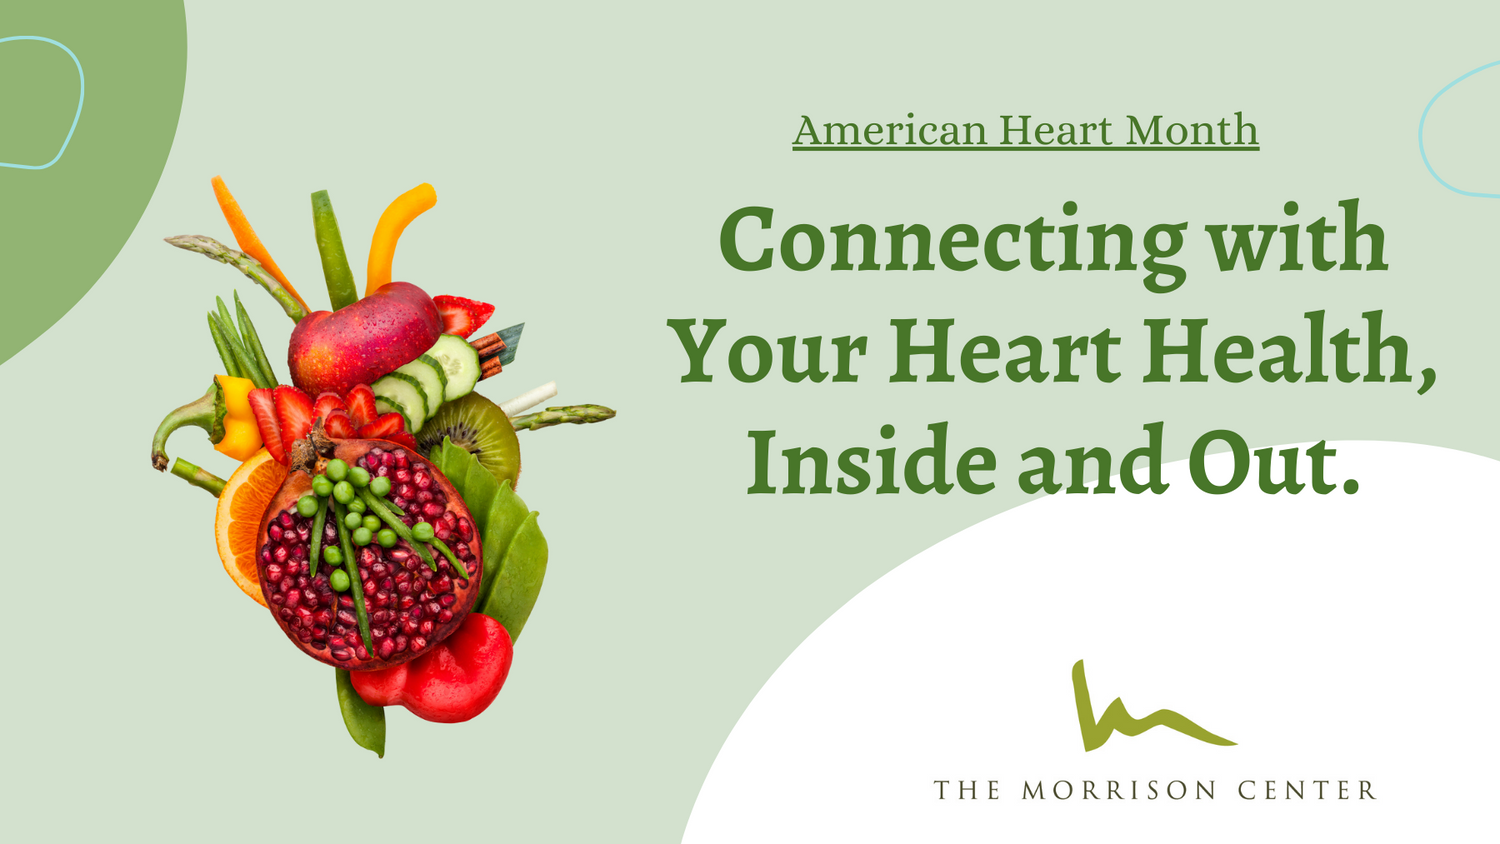 Connecting with Your Heart Health, Inside and Out.